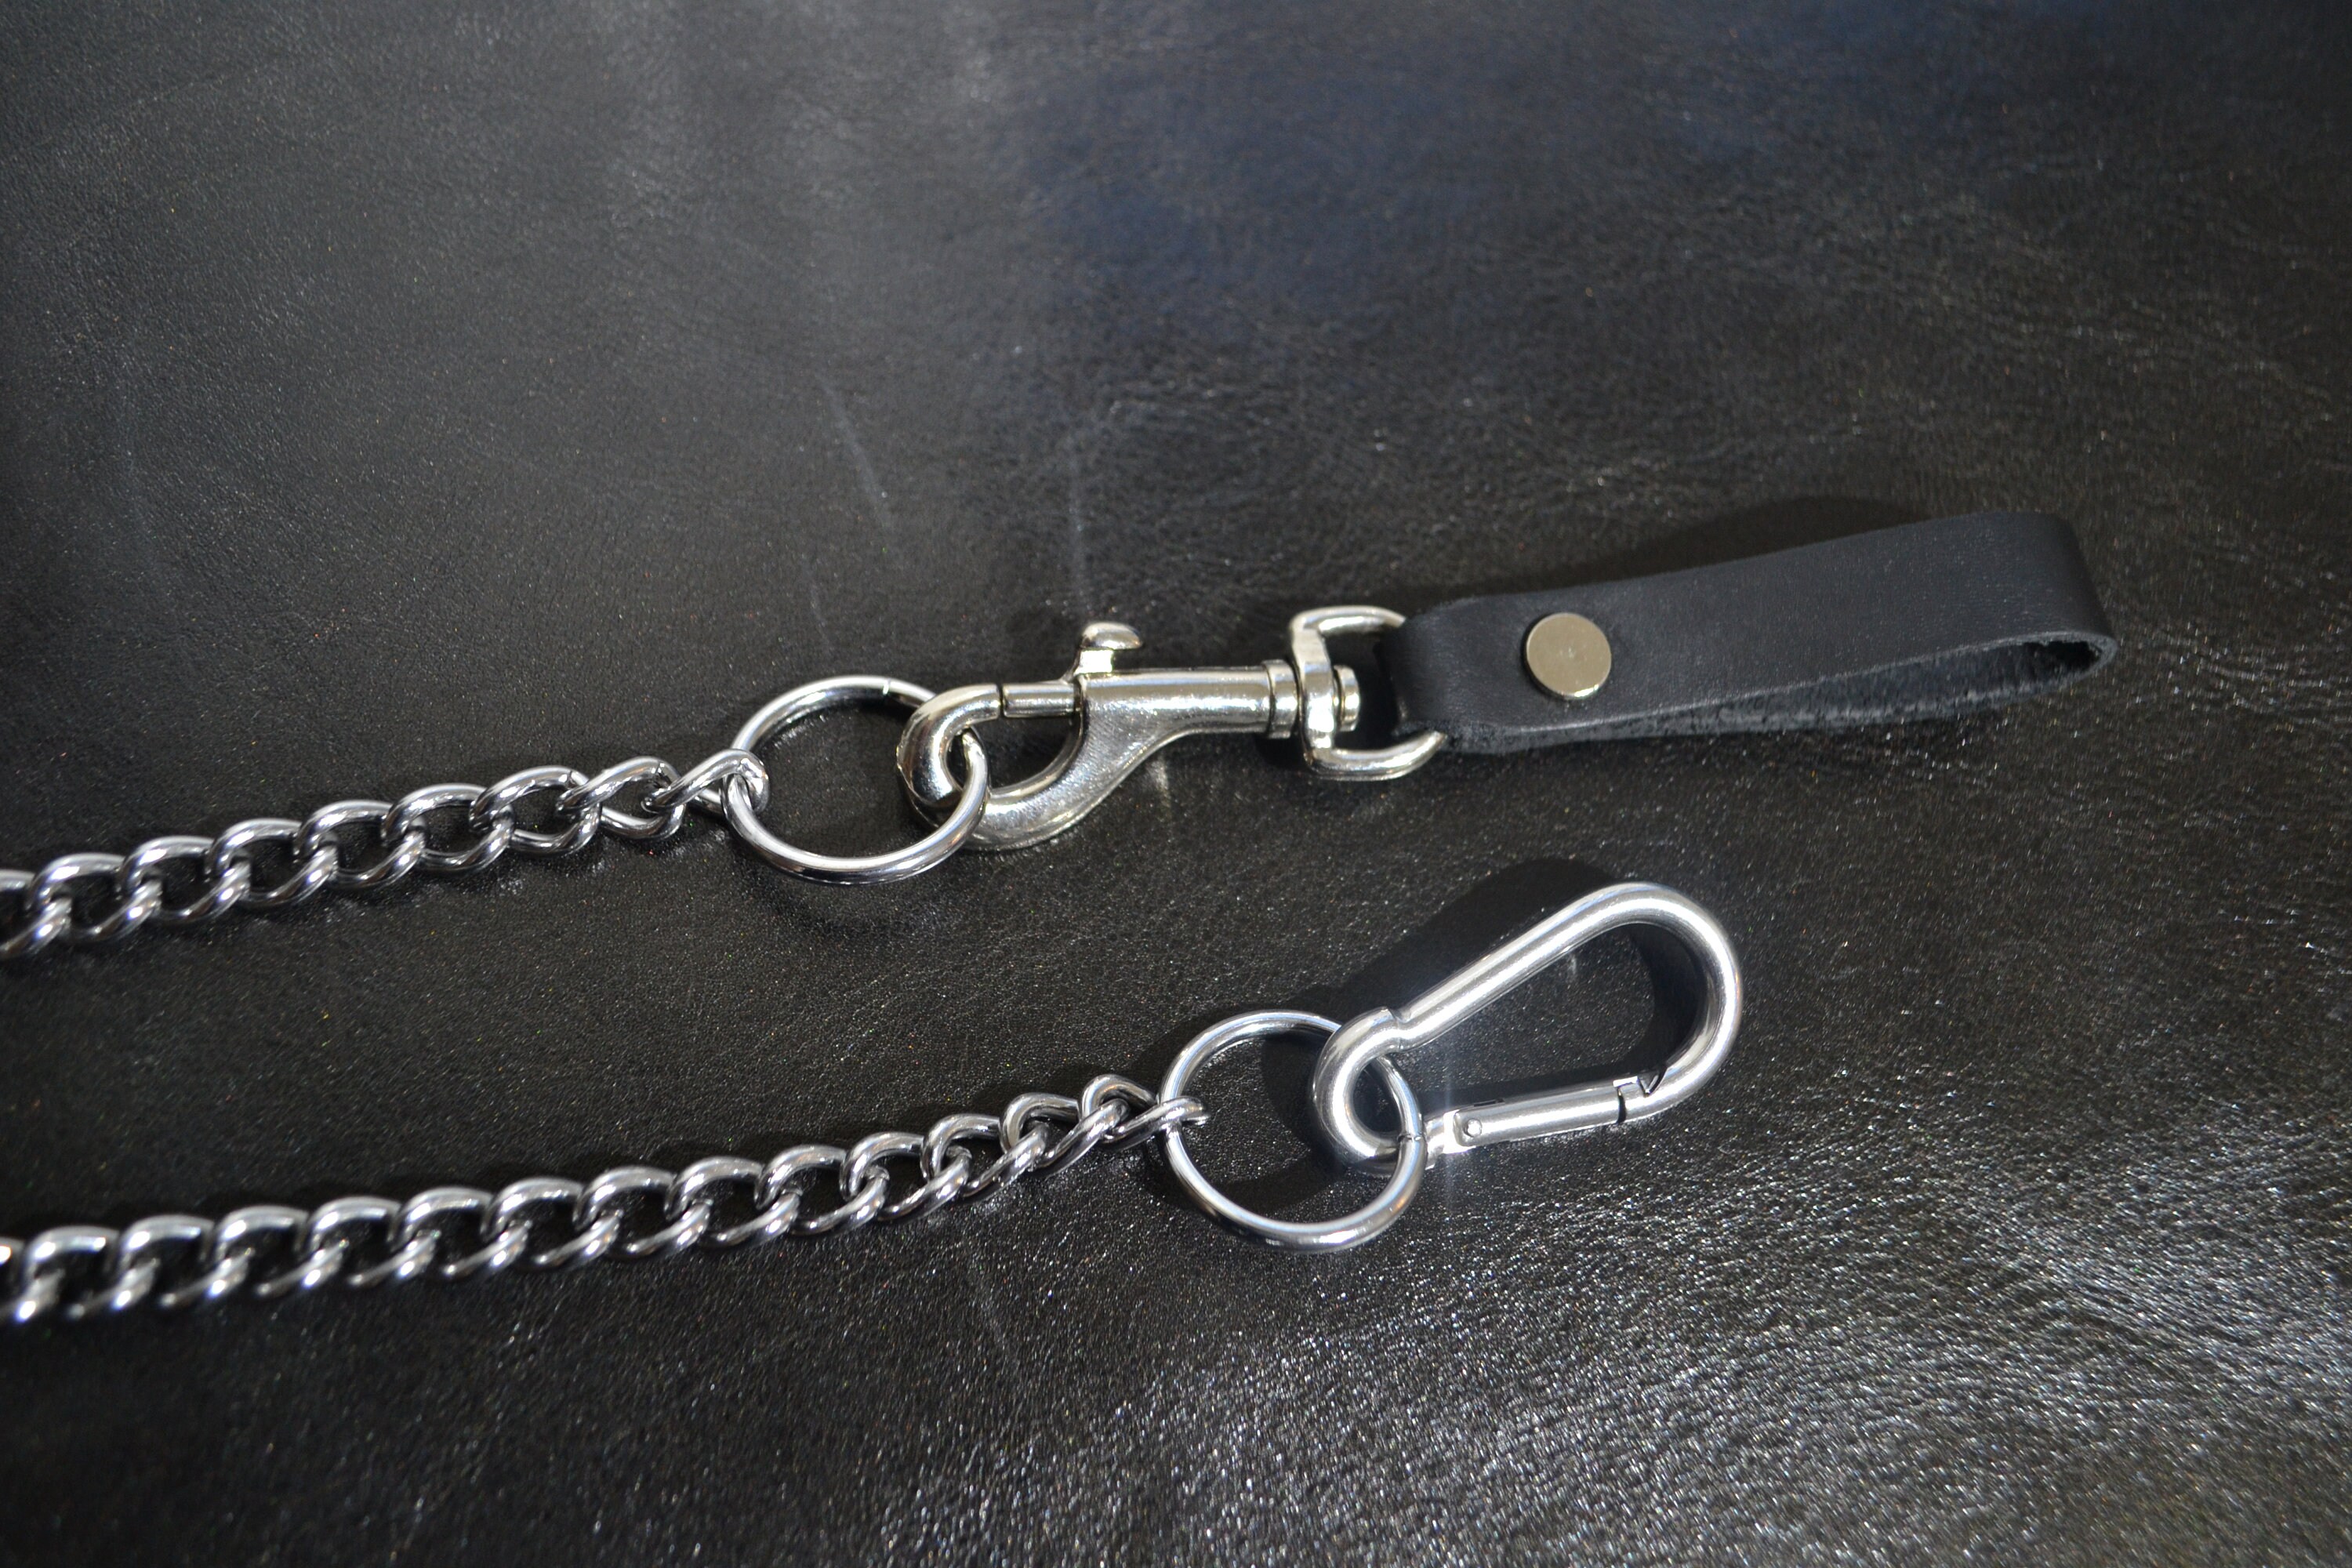 Triple Wallet Chain With O Ring, Belt Chain, 90's Trouser Chain,  Industrial, Alternative, Grunge, Goth, Punk, Rock, Grungy 